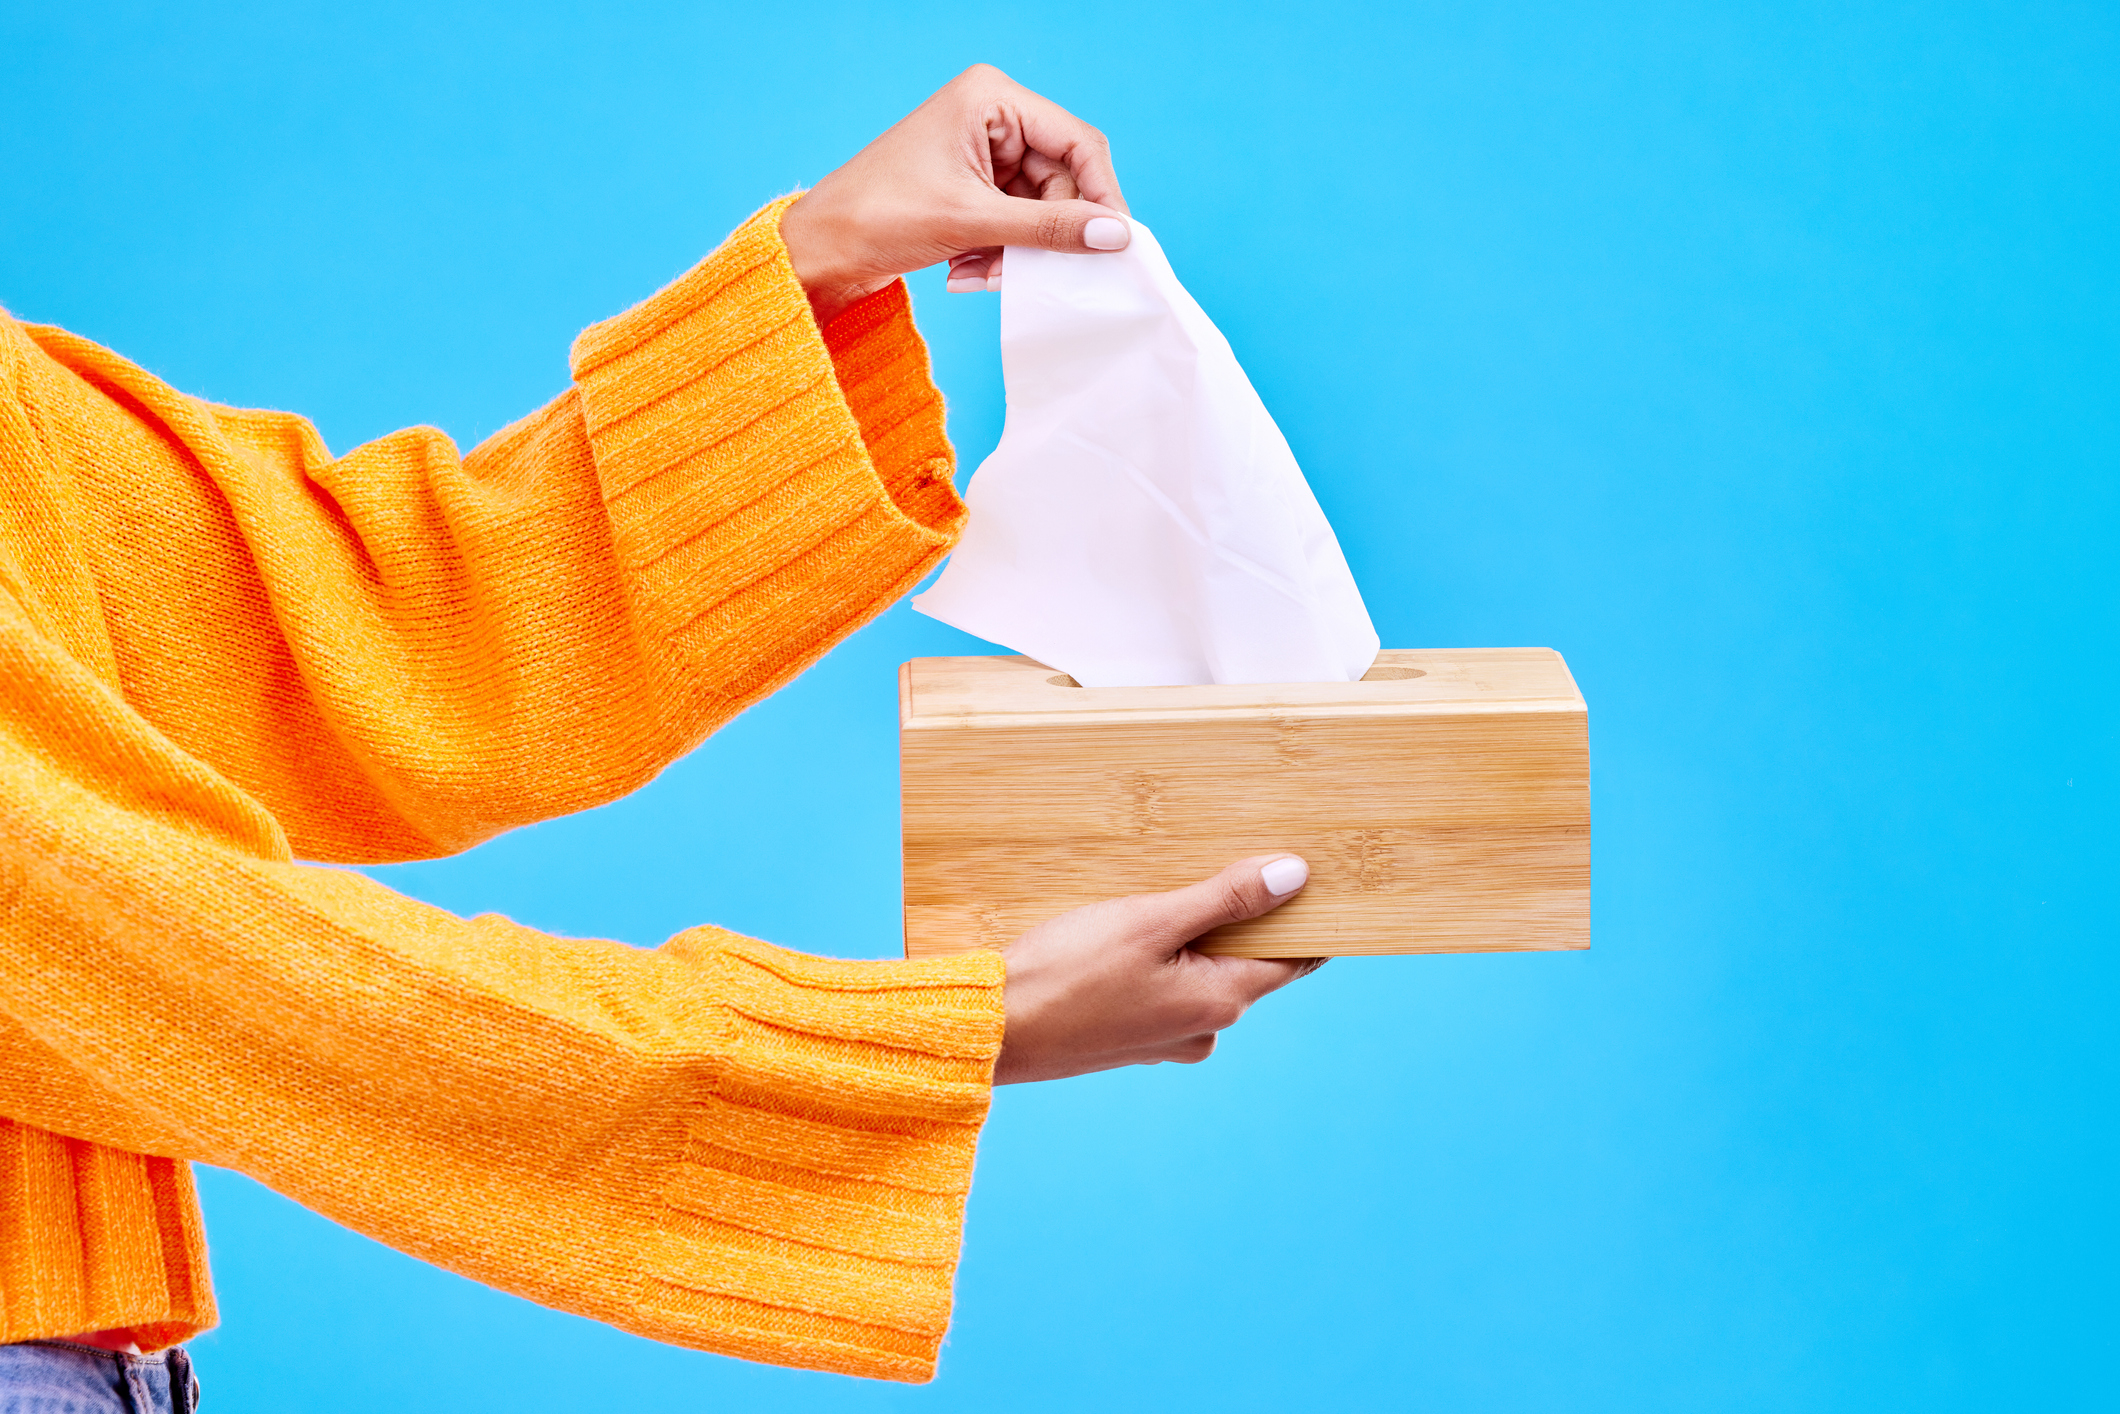 Person pulling tissue from a box, possibly related to dealing with emotional moments in relationships